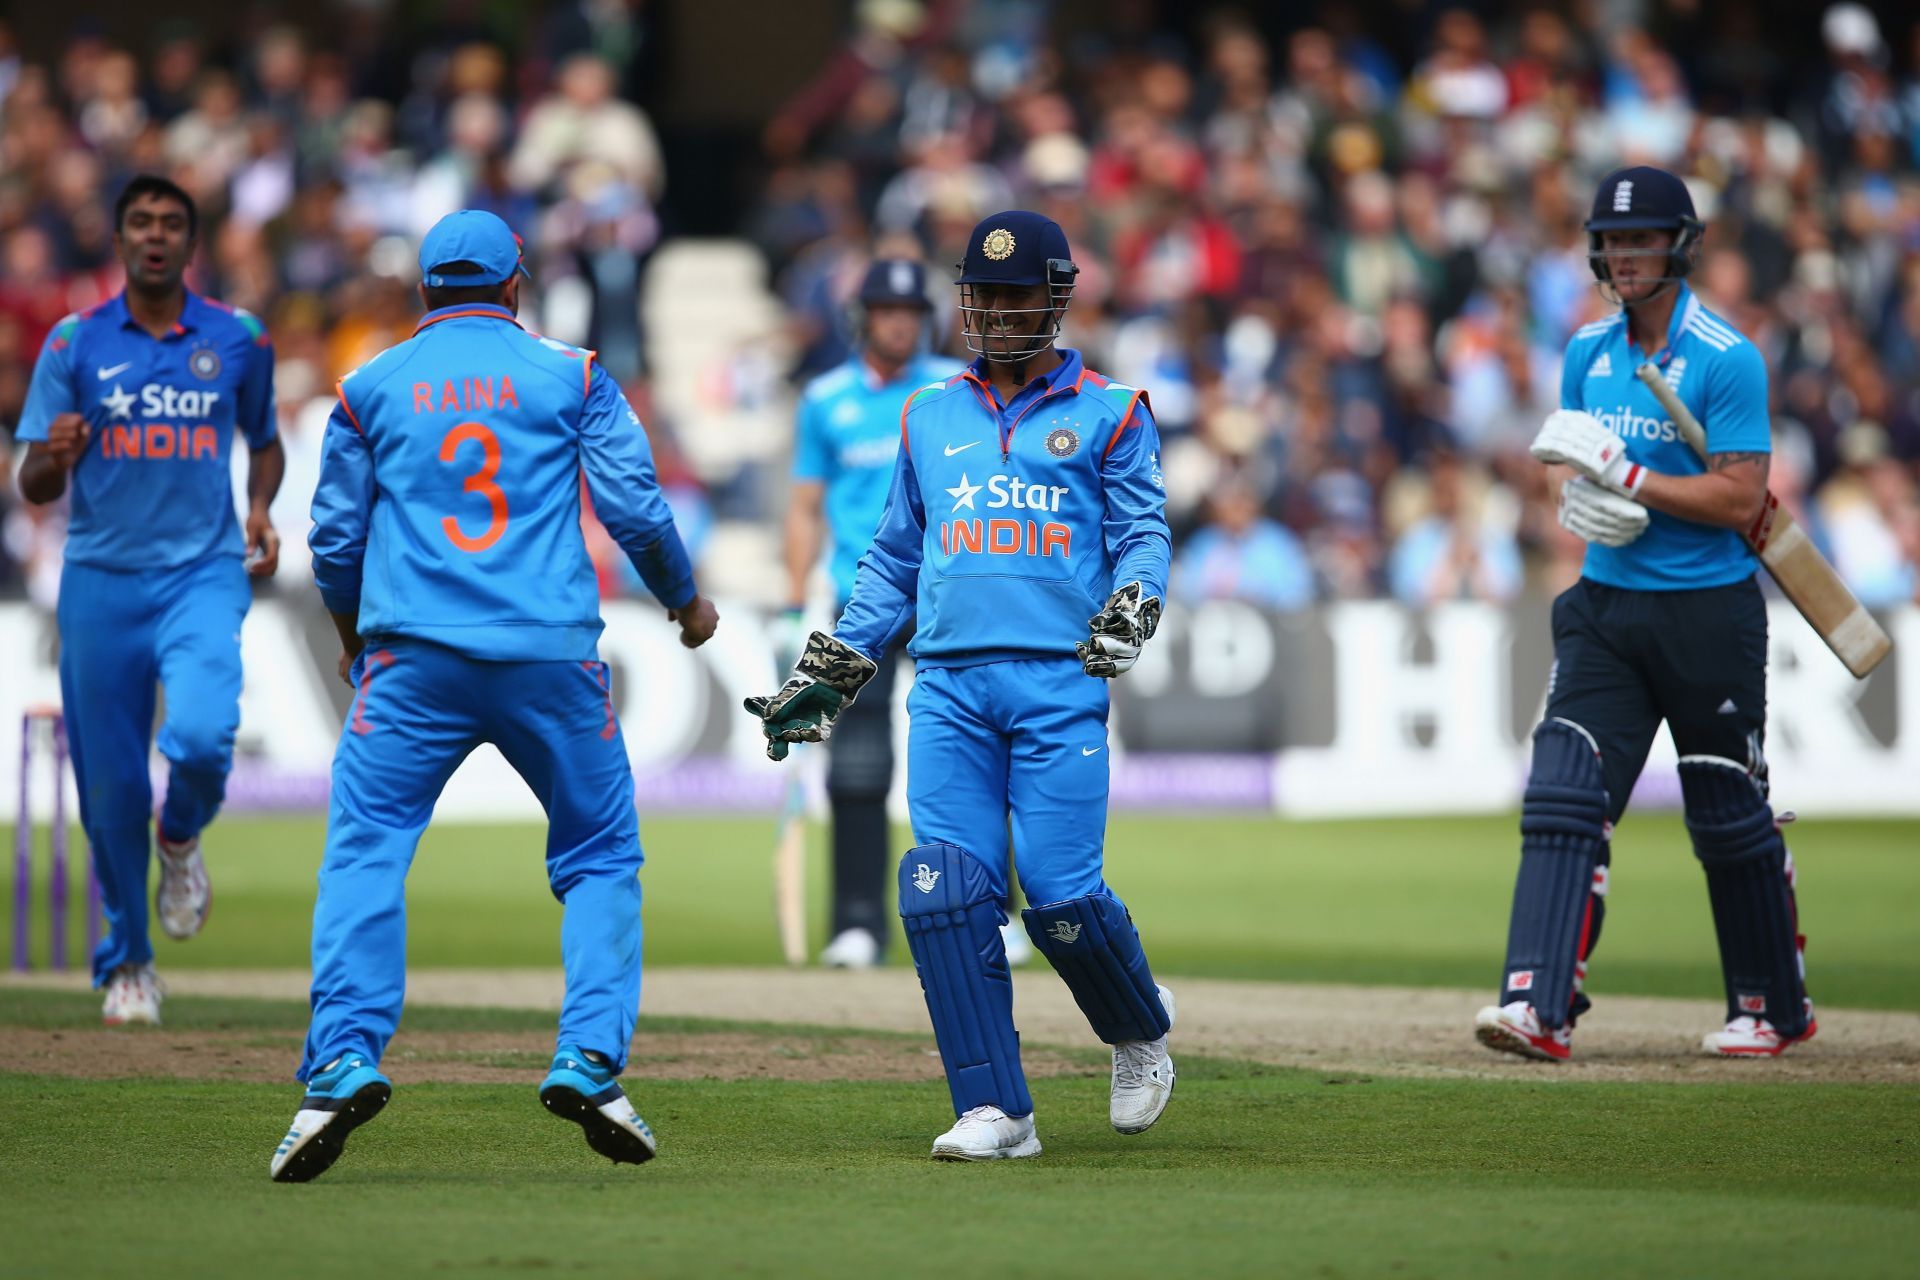 England v India - Royal London One-Day Series 2014 (Image: Getty)